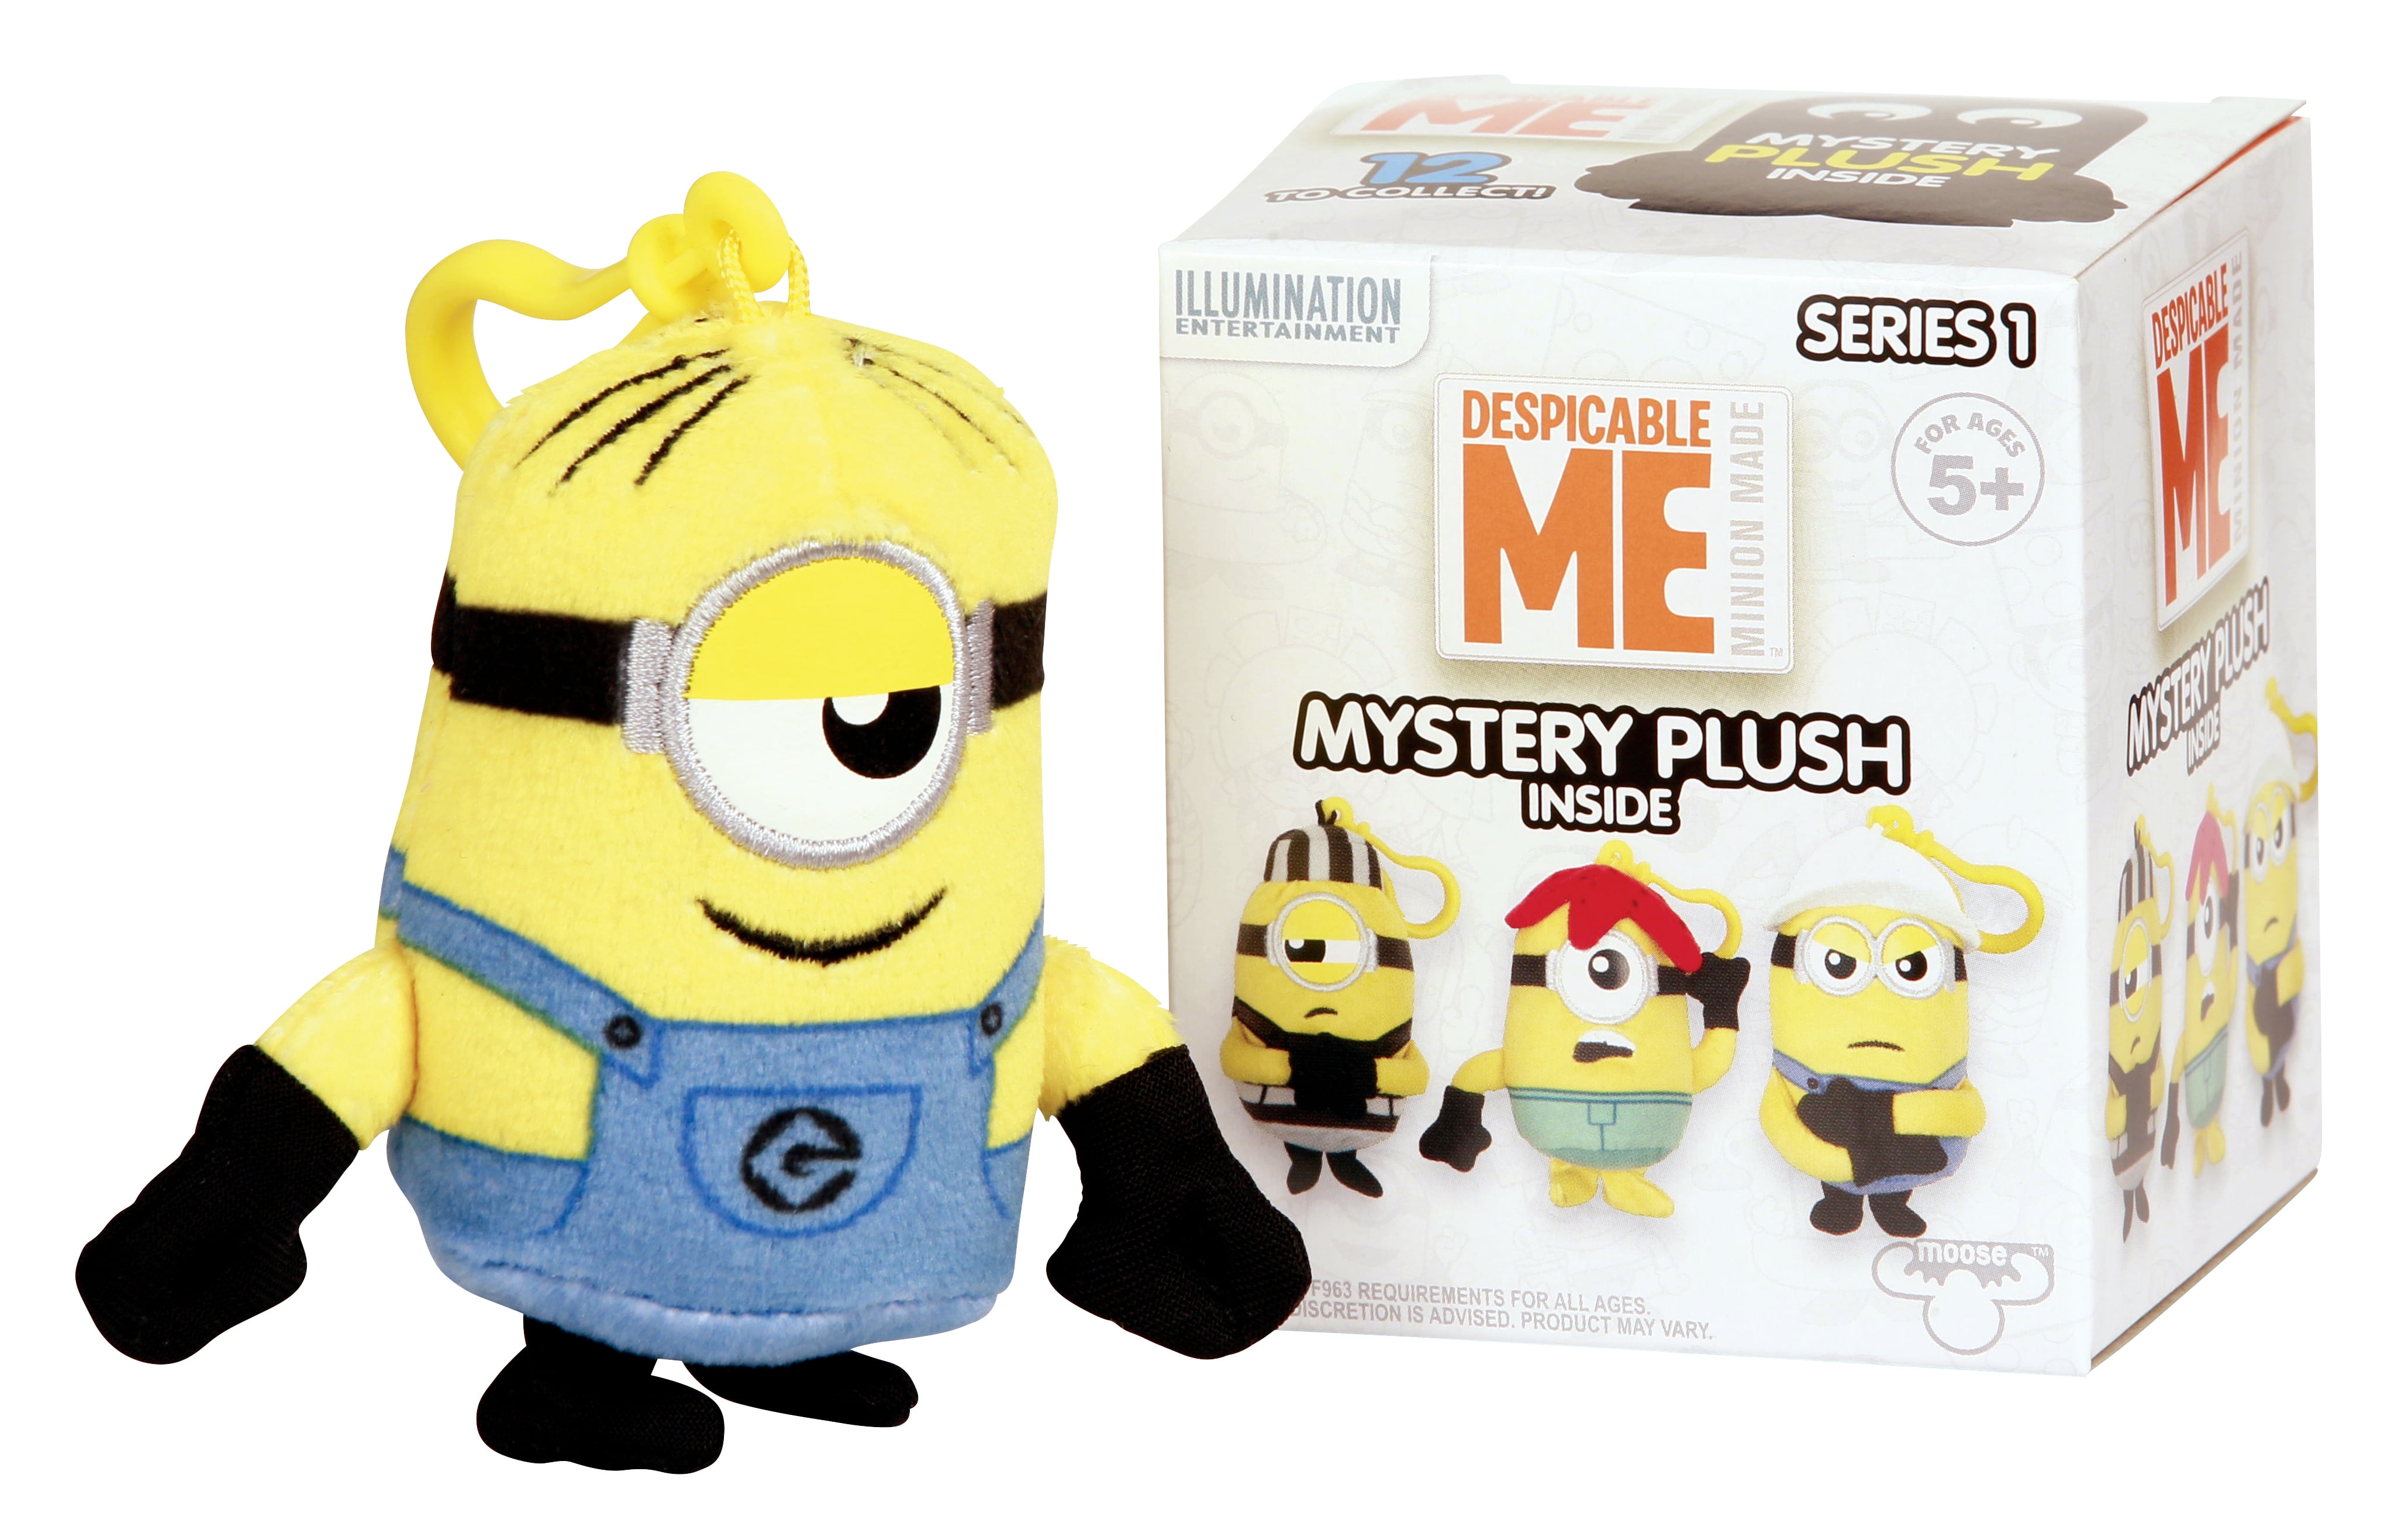 Pack of 2 Giant 55cm XL Despicable Me 3 Minion & Num Nom Party Toy Fun Game Gift 